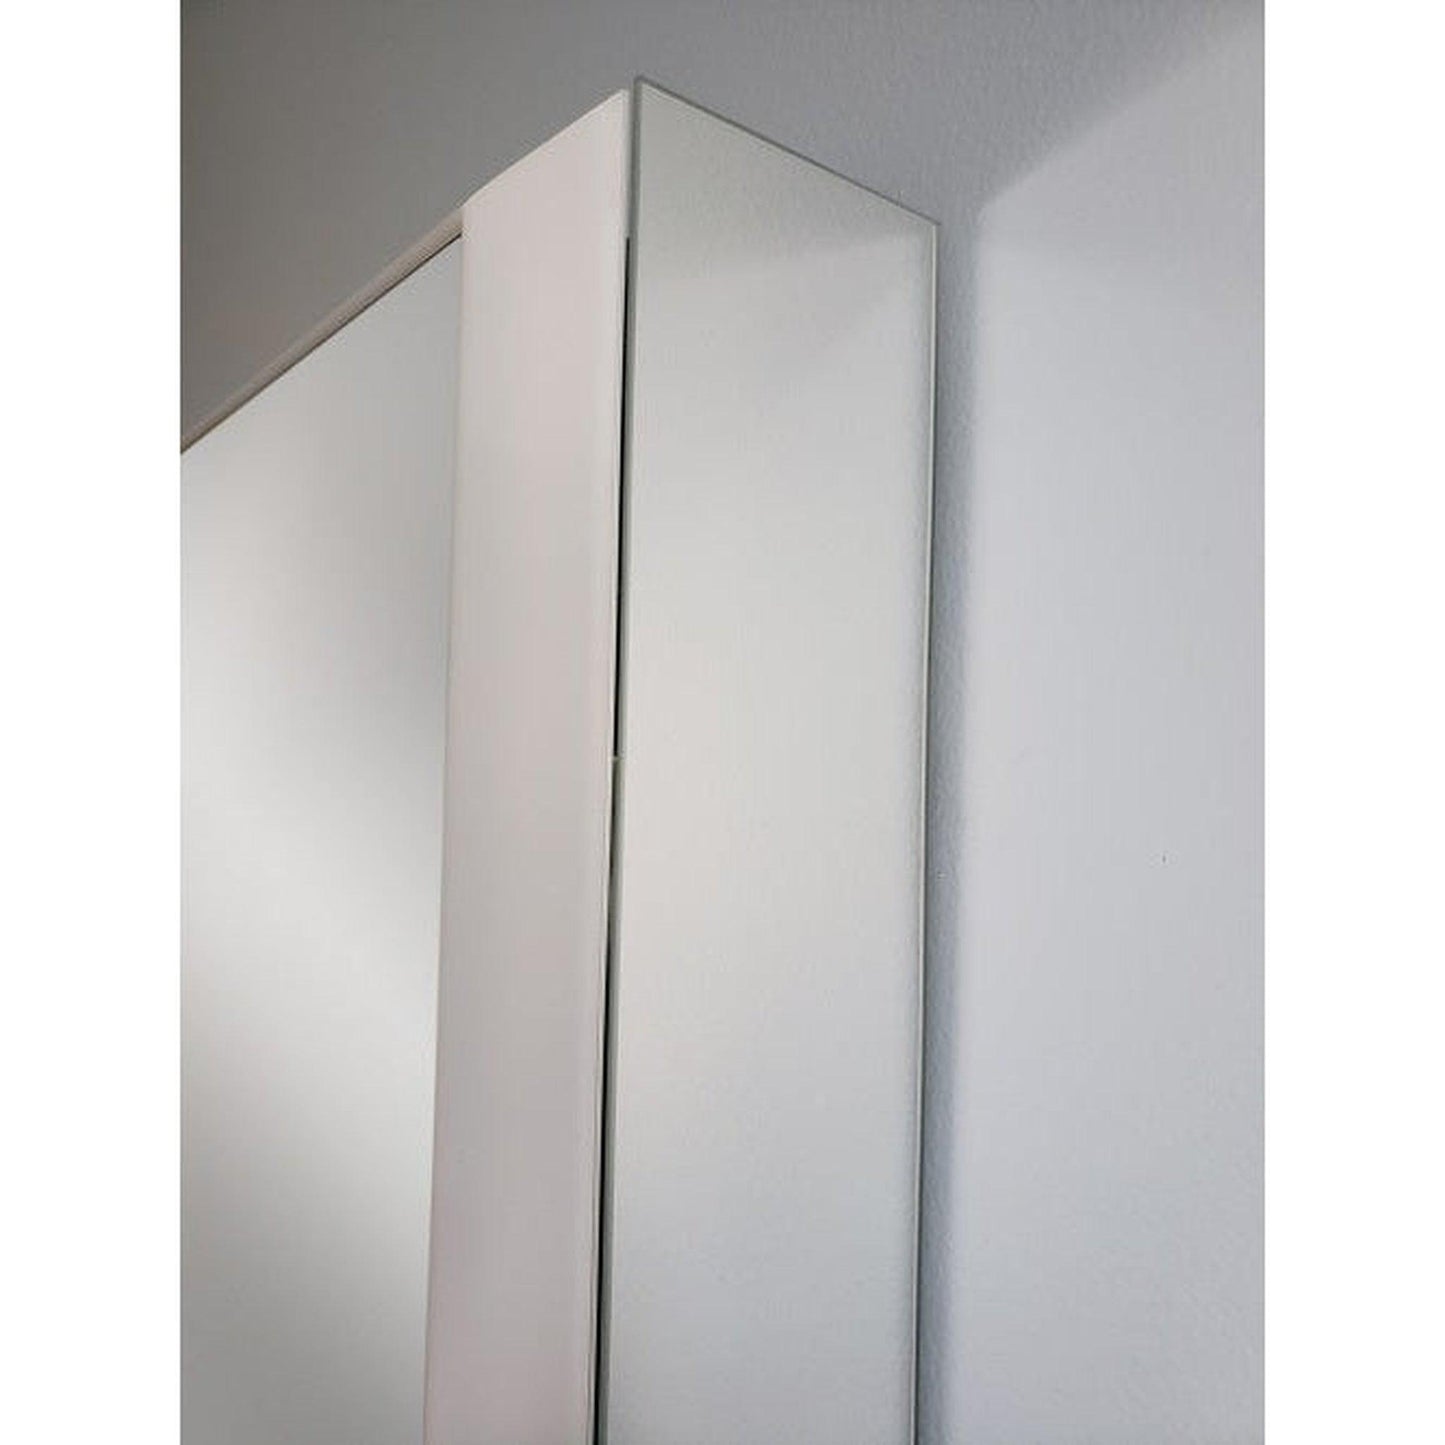 Sidler Quadro 32" x 36" 4000K 2 Offset Left Hinged Mirror Doors Anodized Aluminum Medicine Cabinet With Night Light Function, Built-in GFCI Outlet and USB port